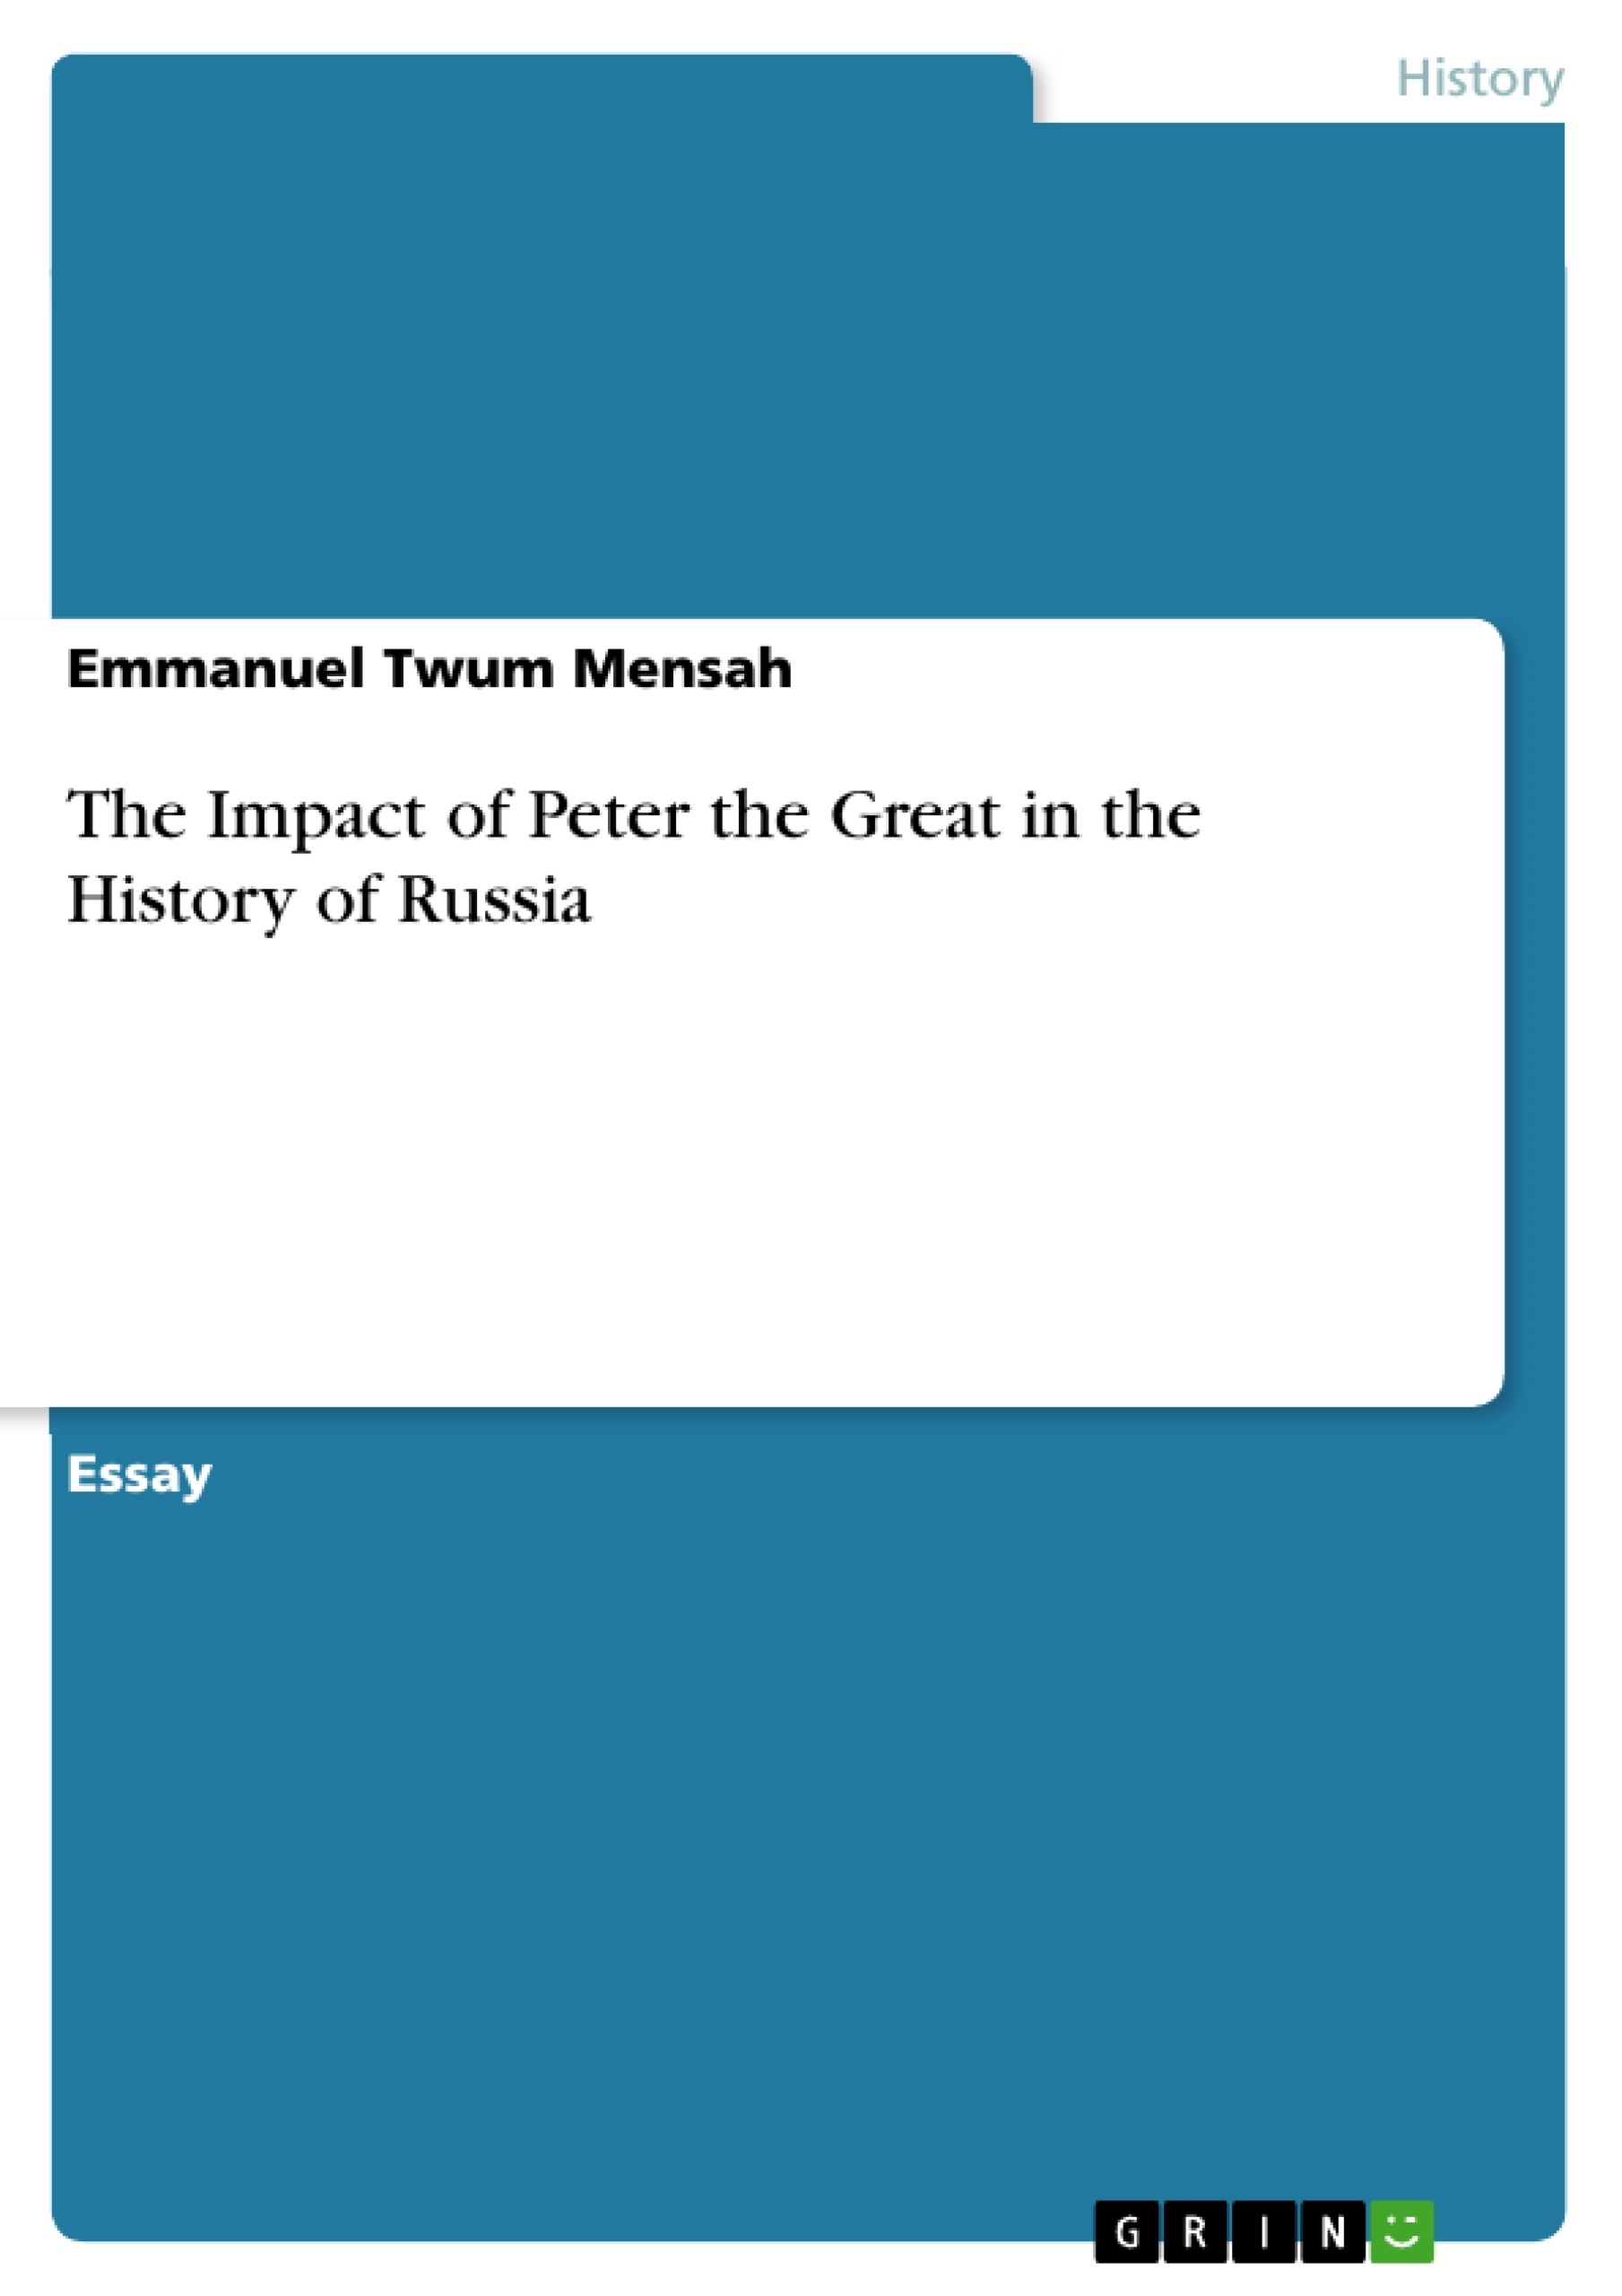 Título: The Impact of Peter the Great in the History of Russia